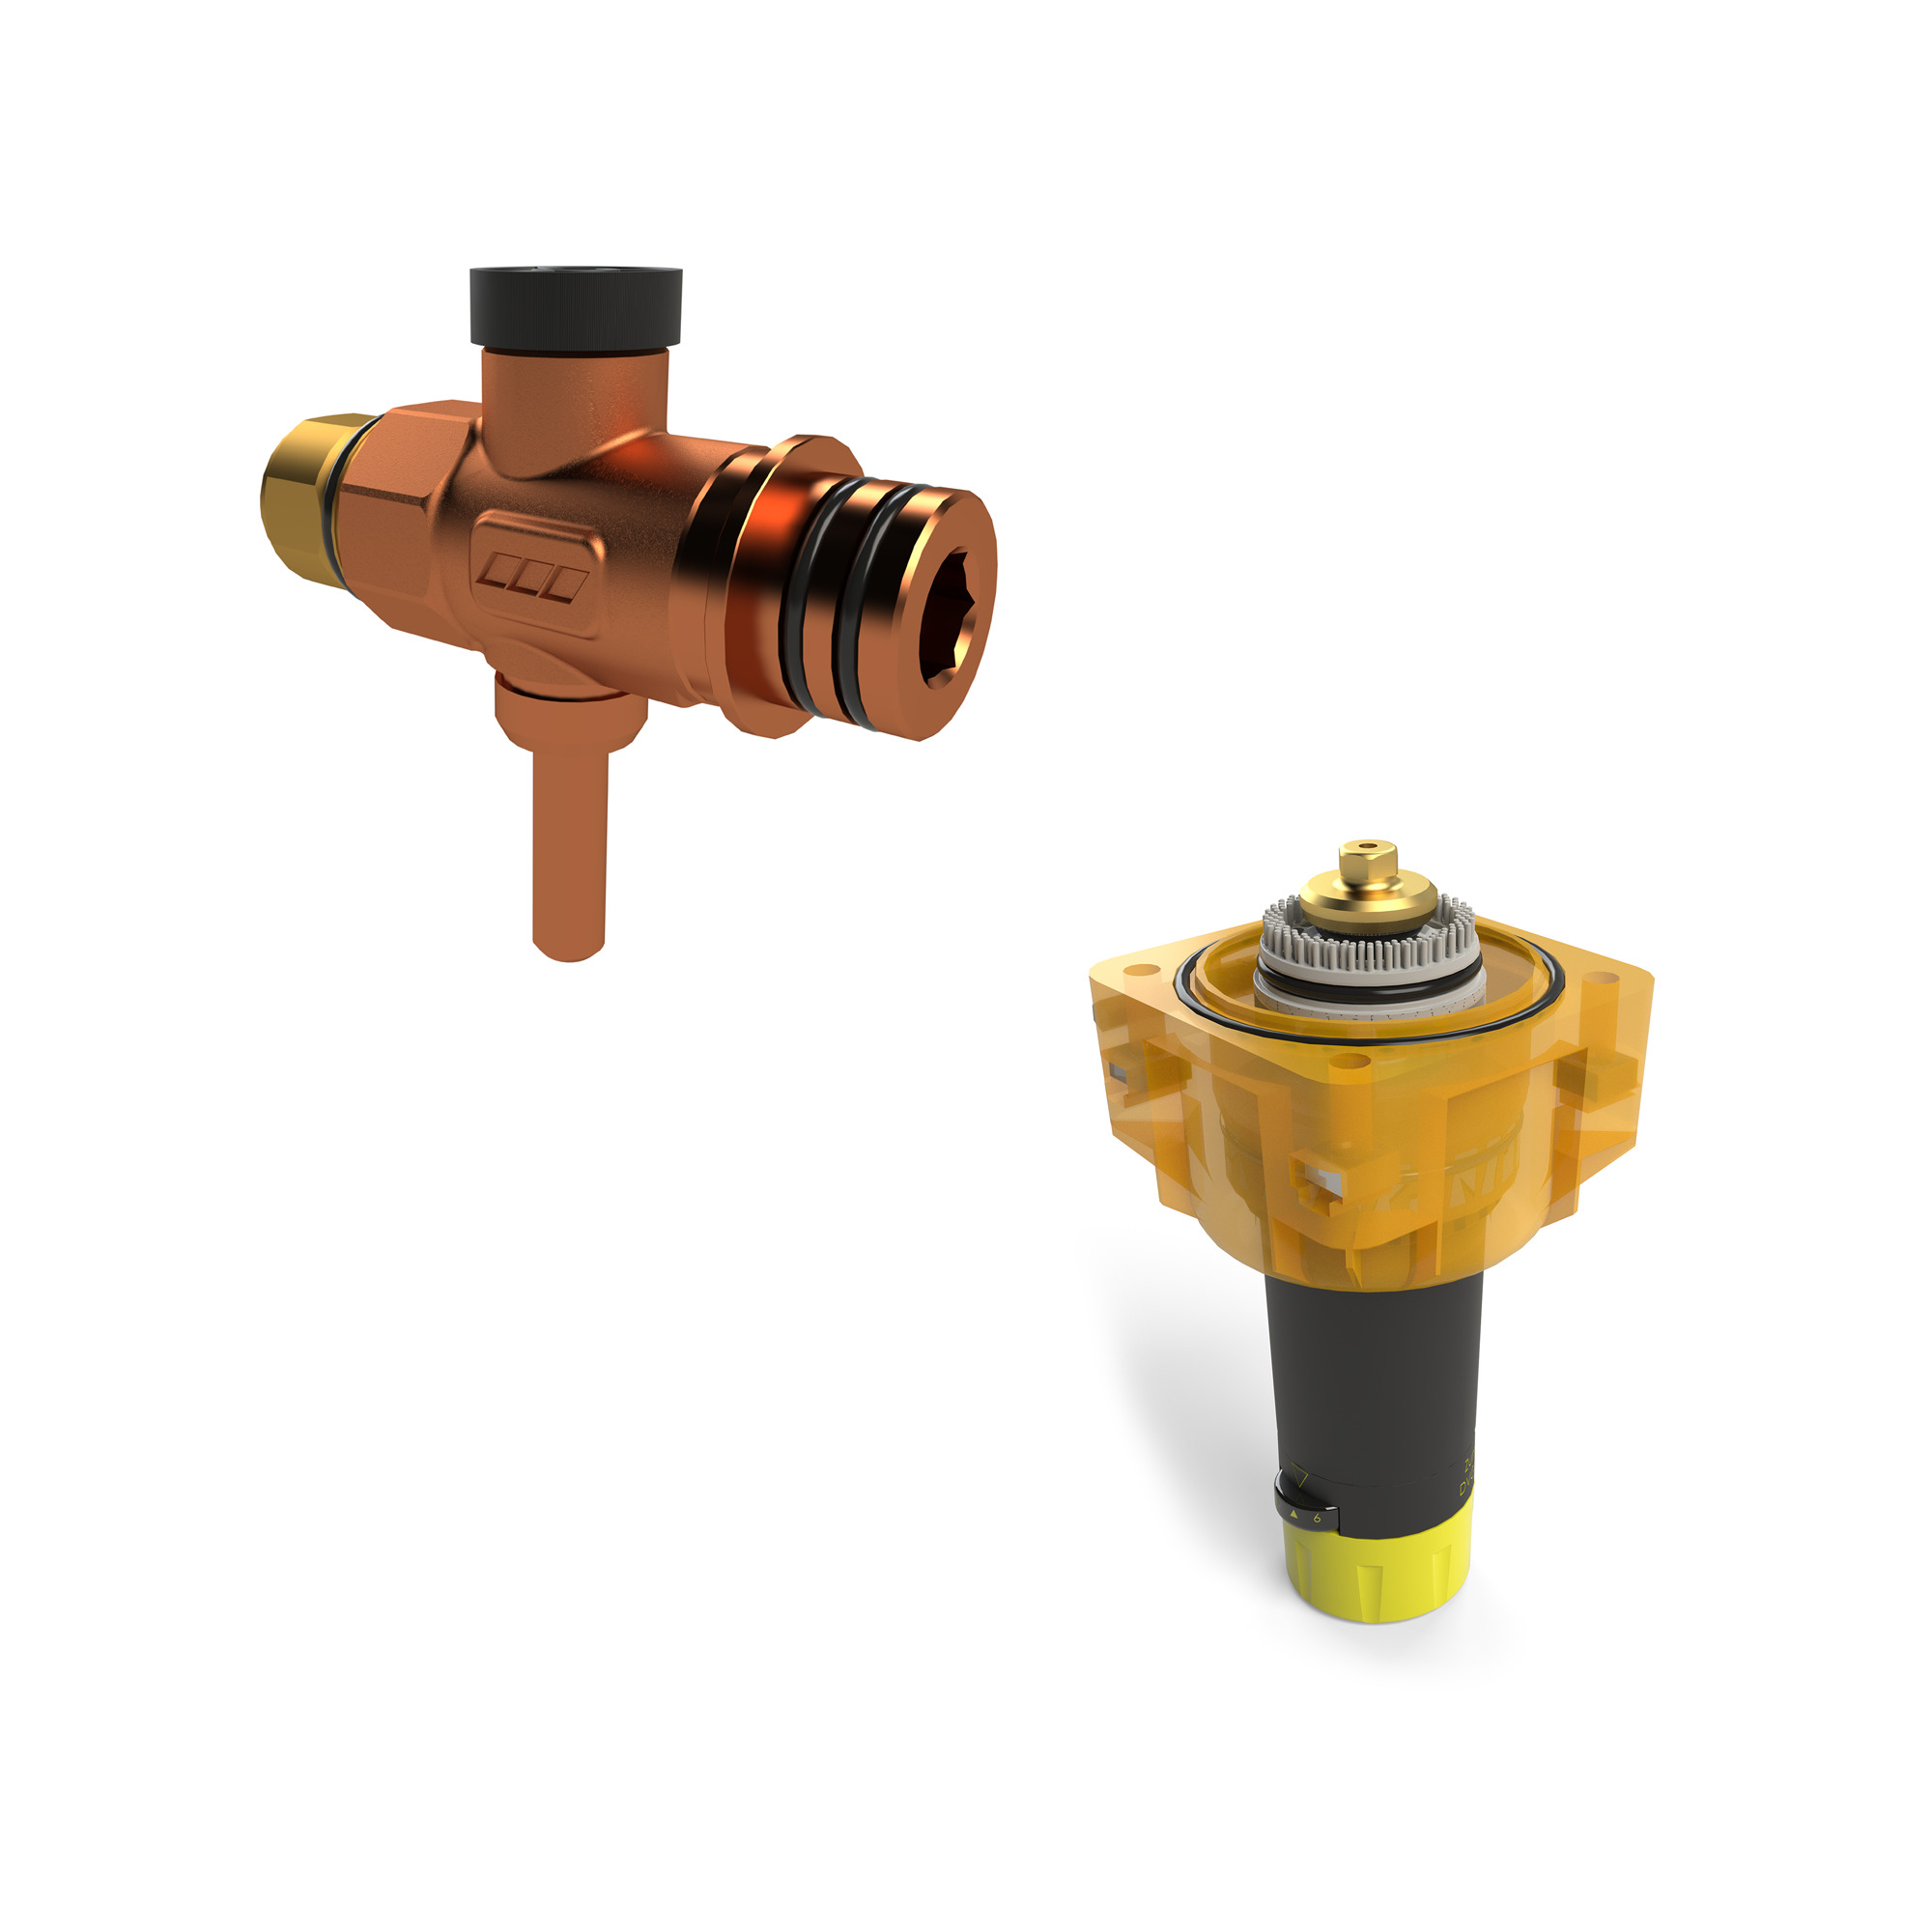 Spare parts for pressure reducing valves and filters